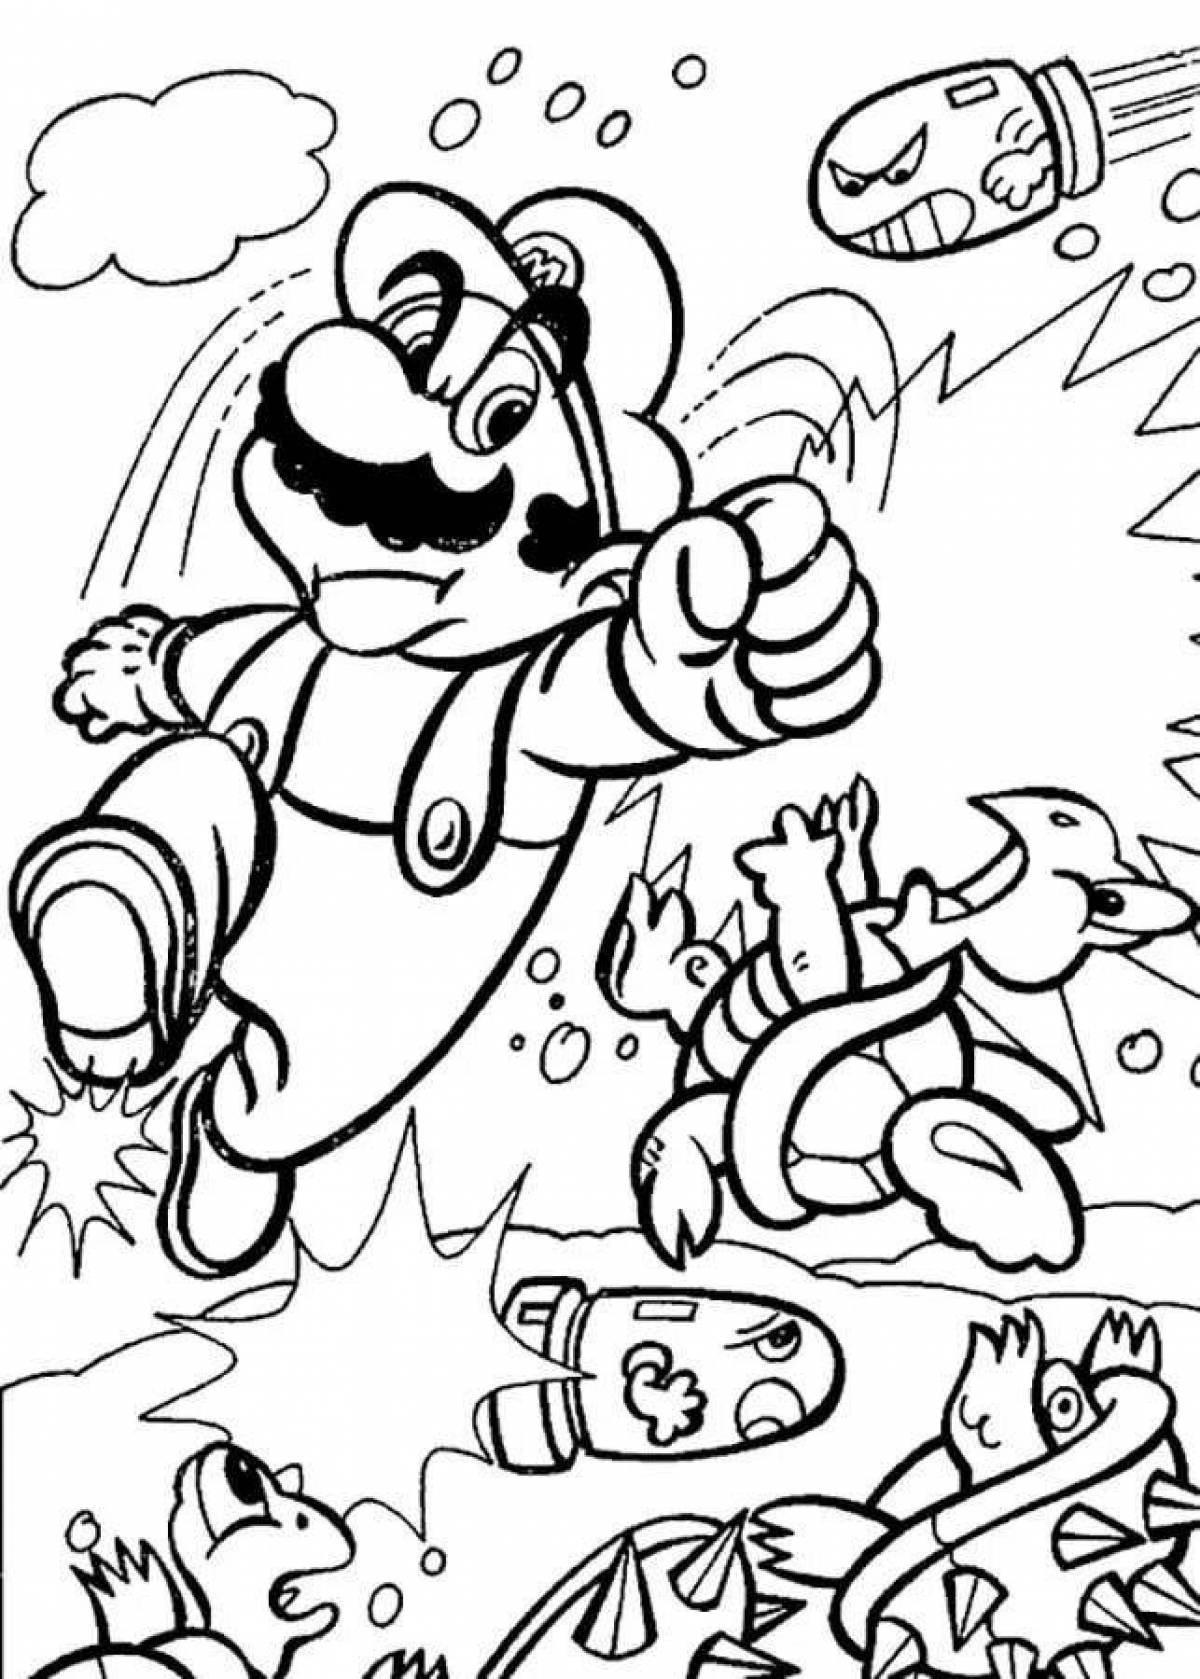 Innovative mario coloring book for kids